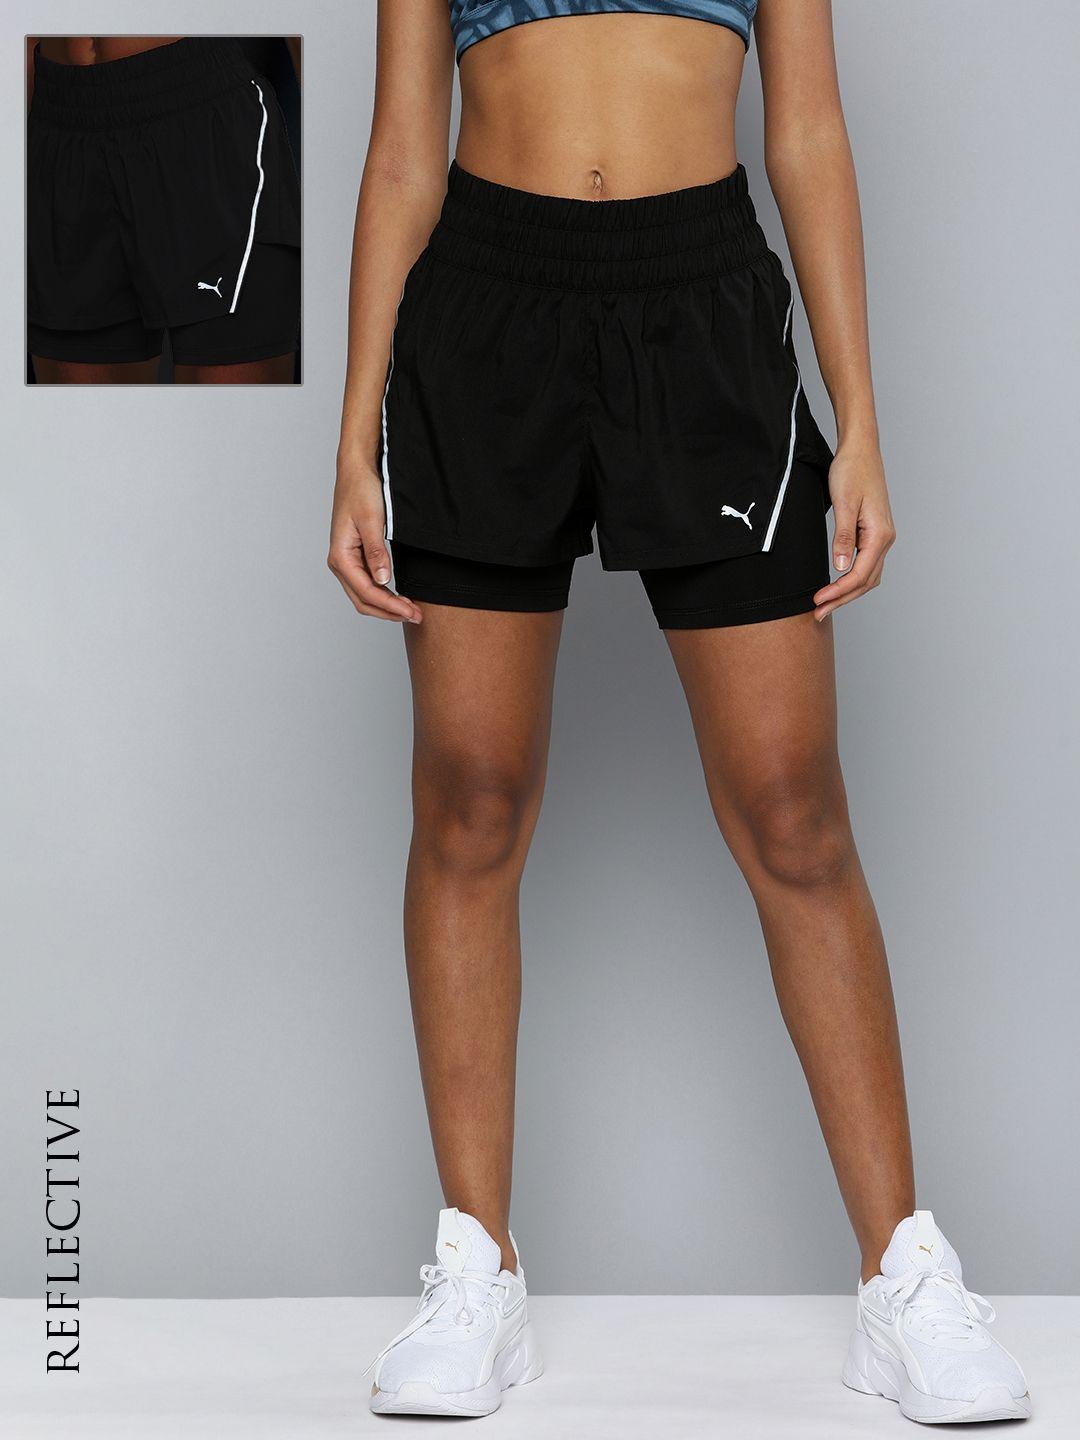 puma-women-dry-cell-reflective-running-sports-shorts-comes-with-attached-tights